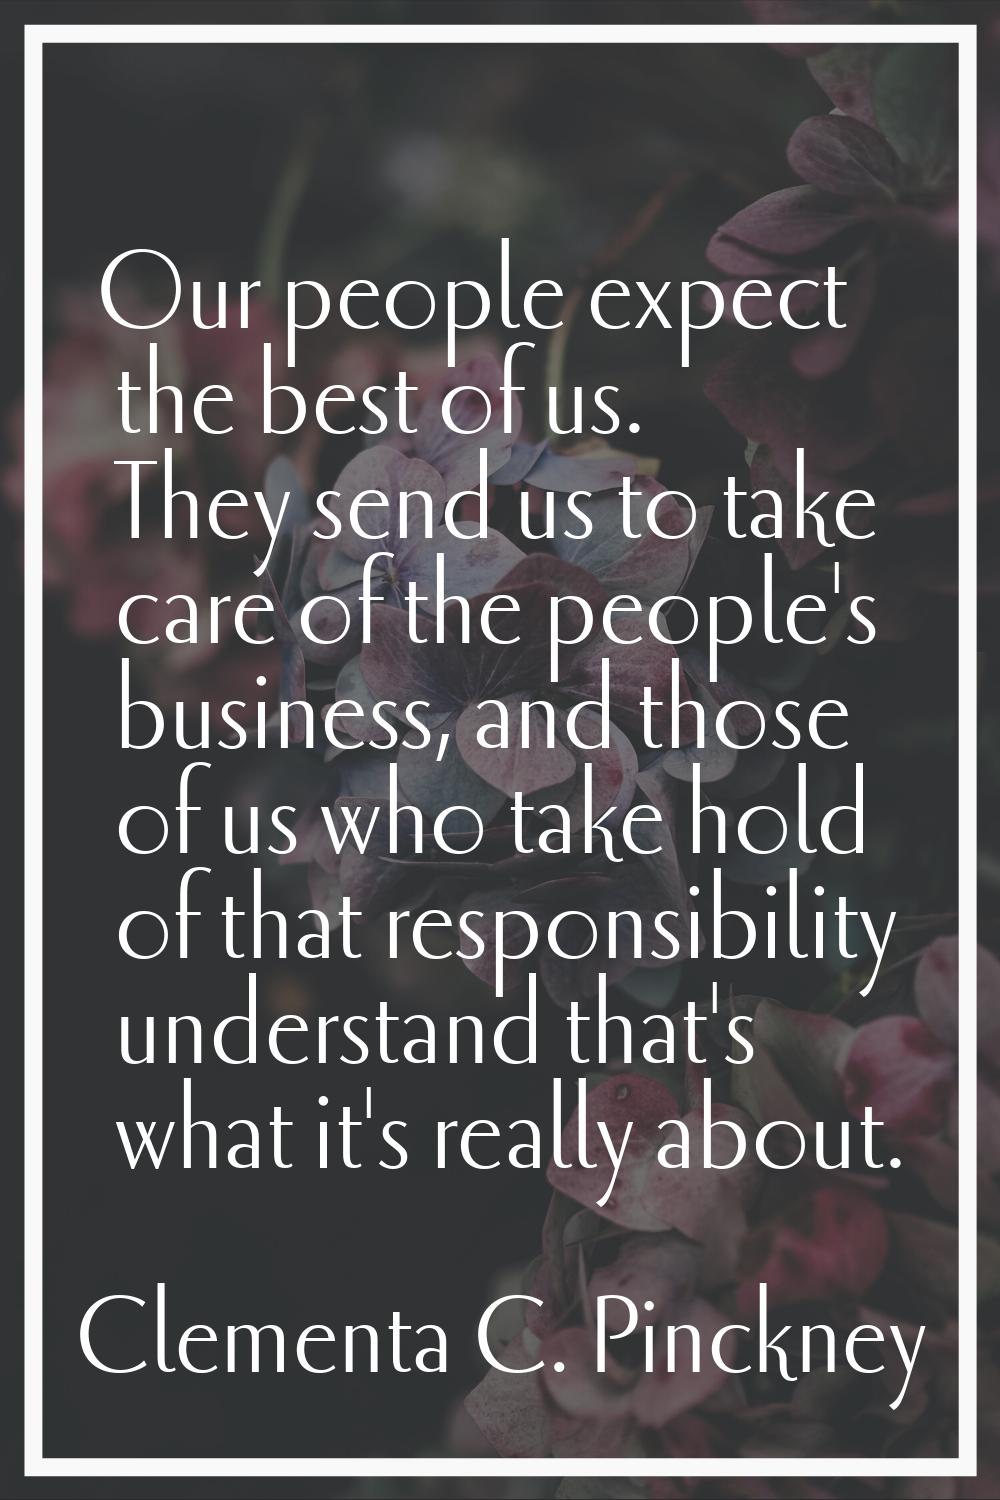 Our people expect the best of us. They send us to take care of the people's business, and those of 